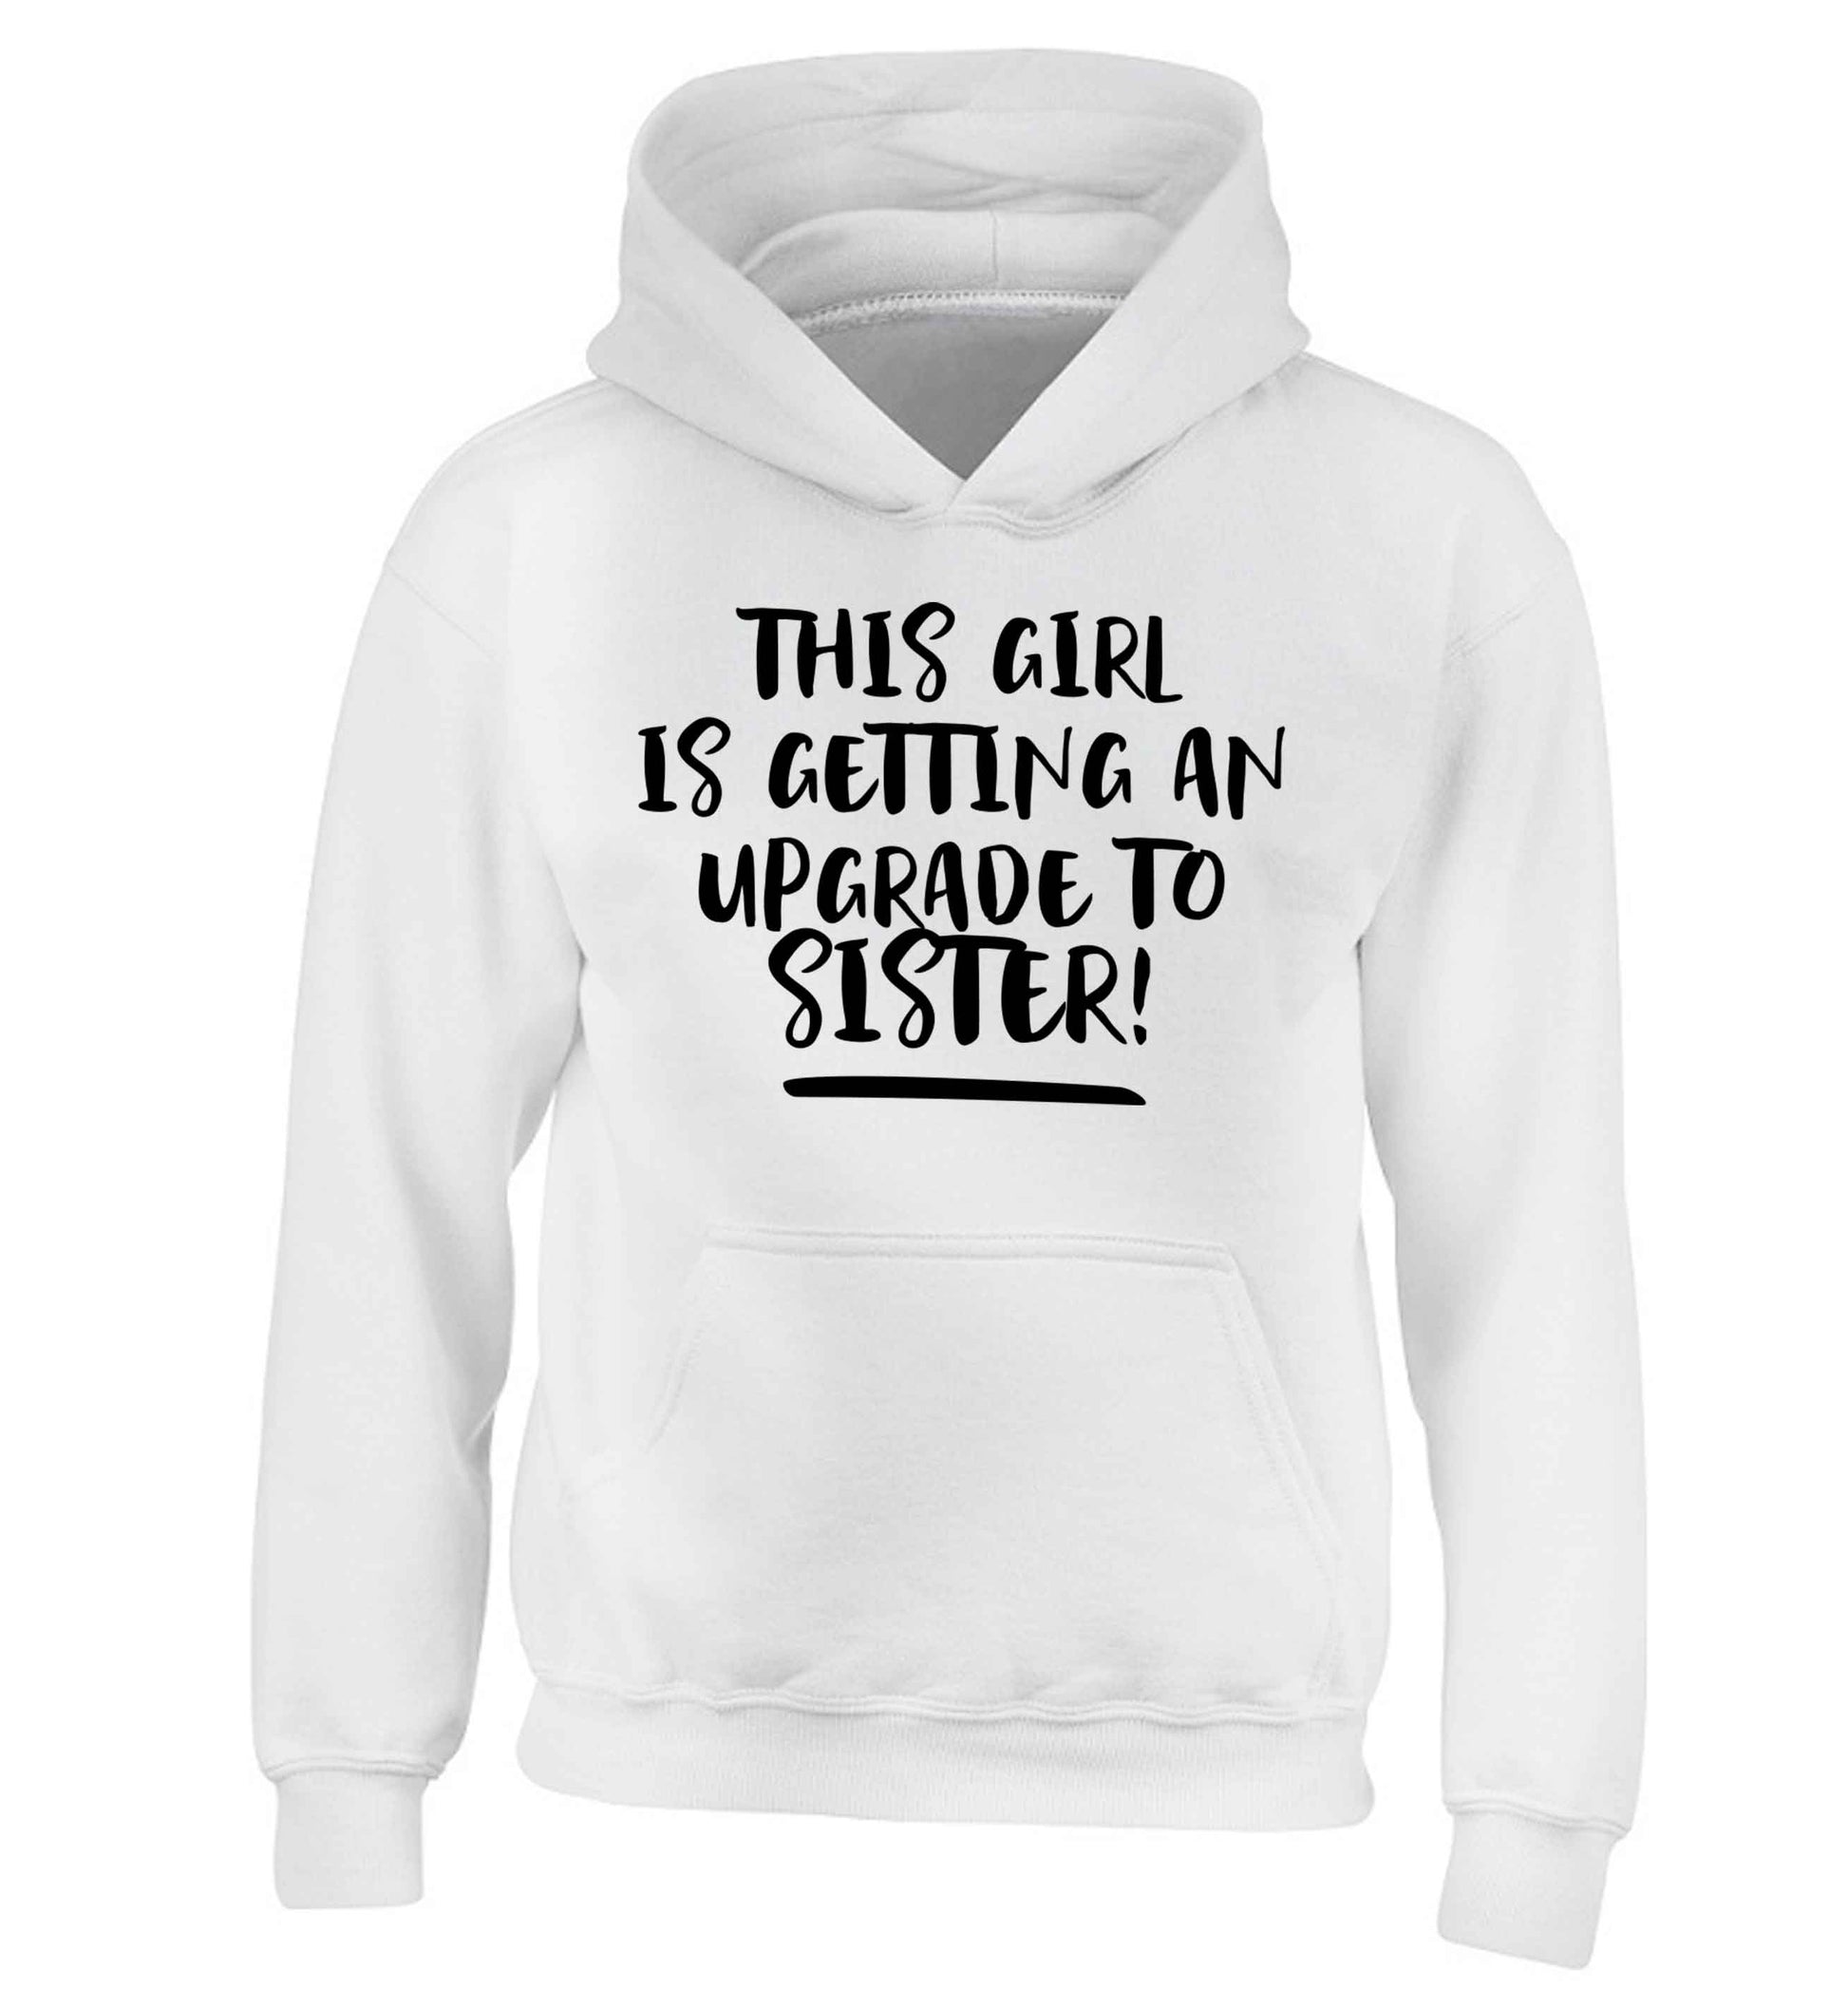 This girl is getting an upgrade to sister! children's white hoodie 12-13 Years